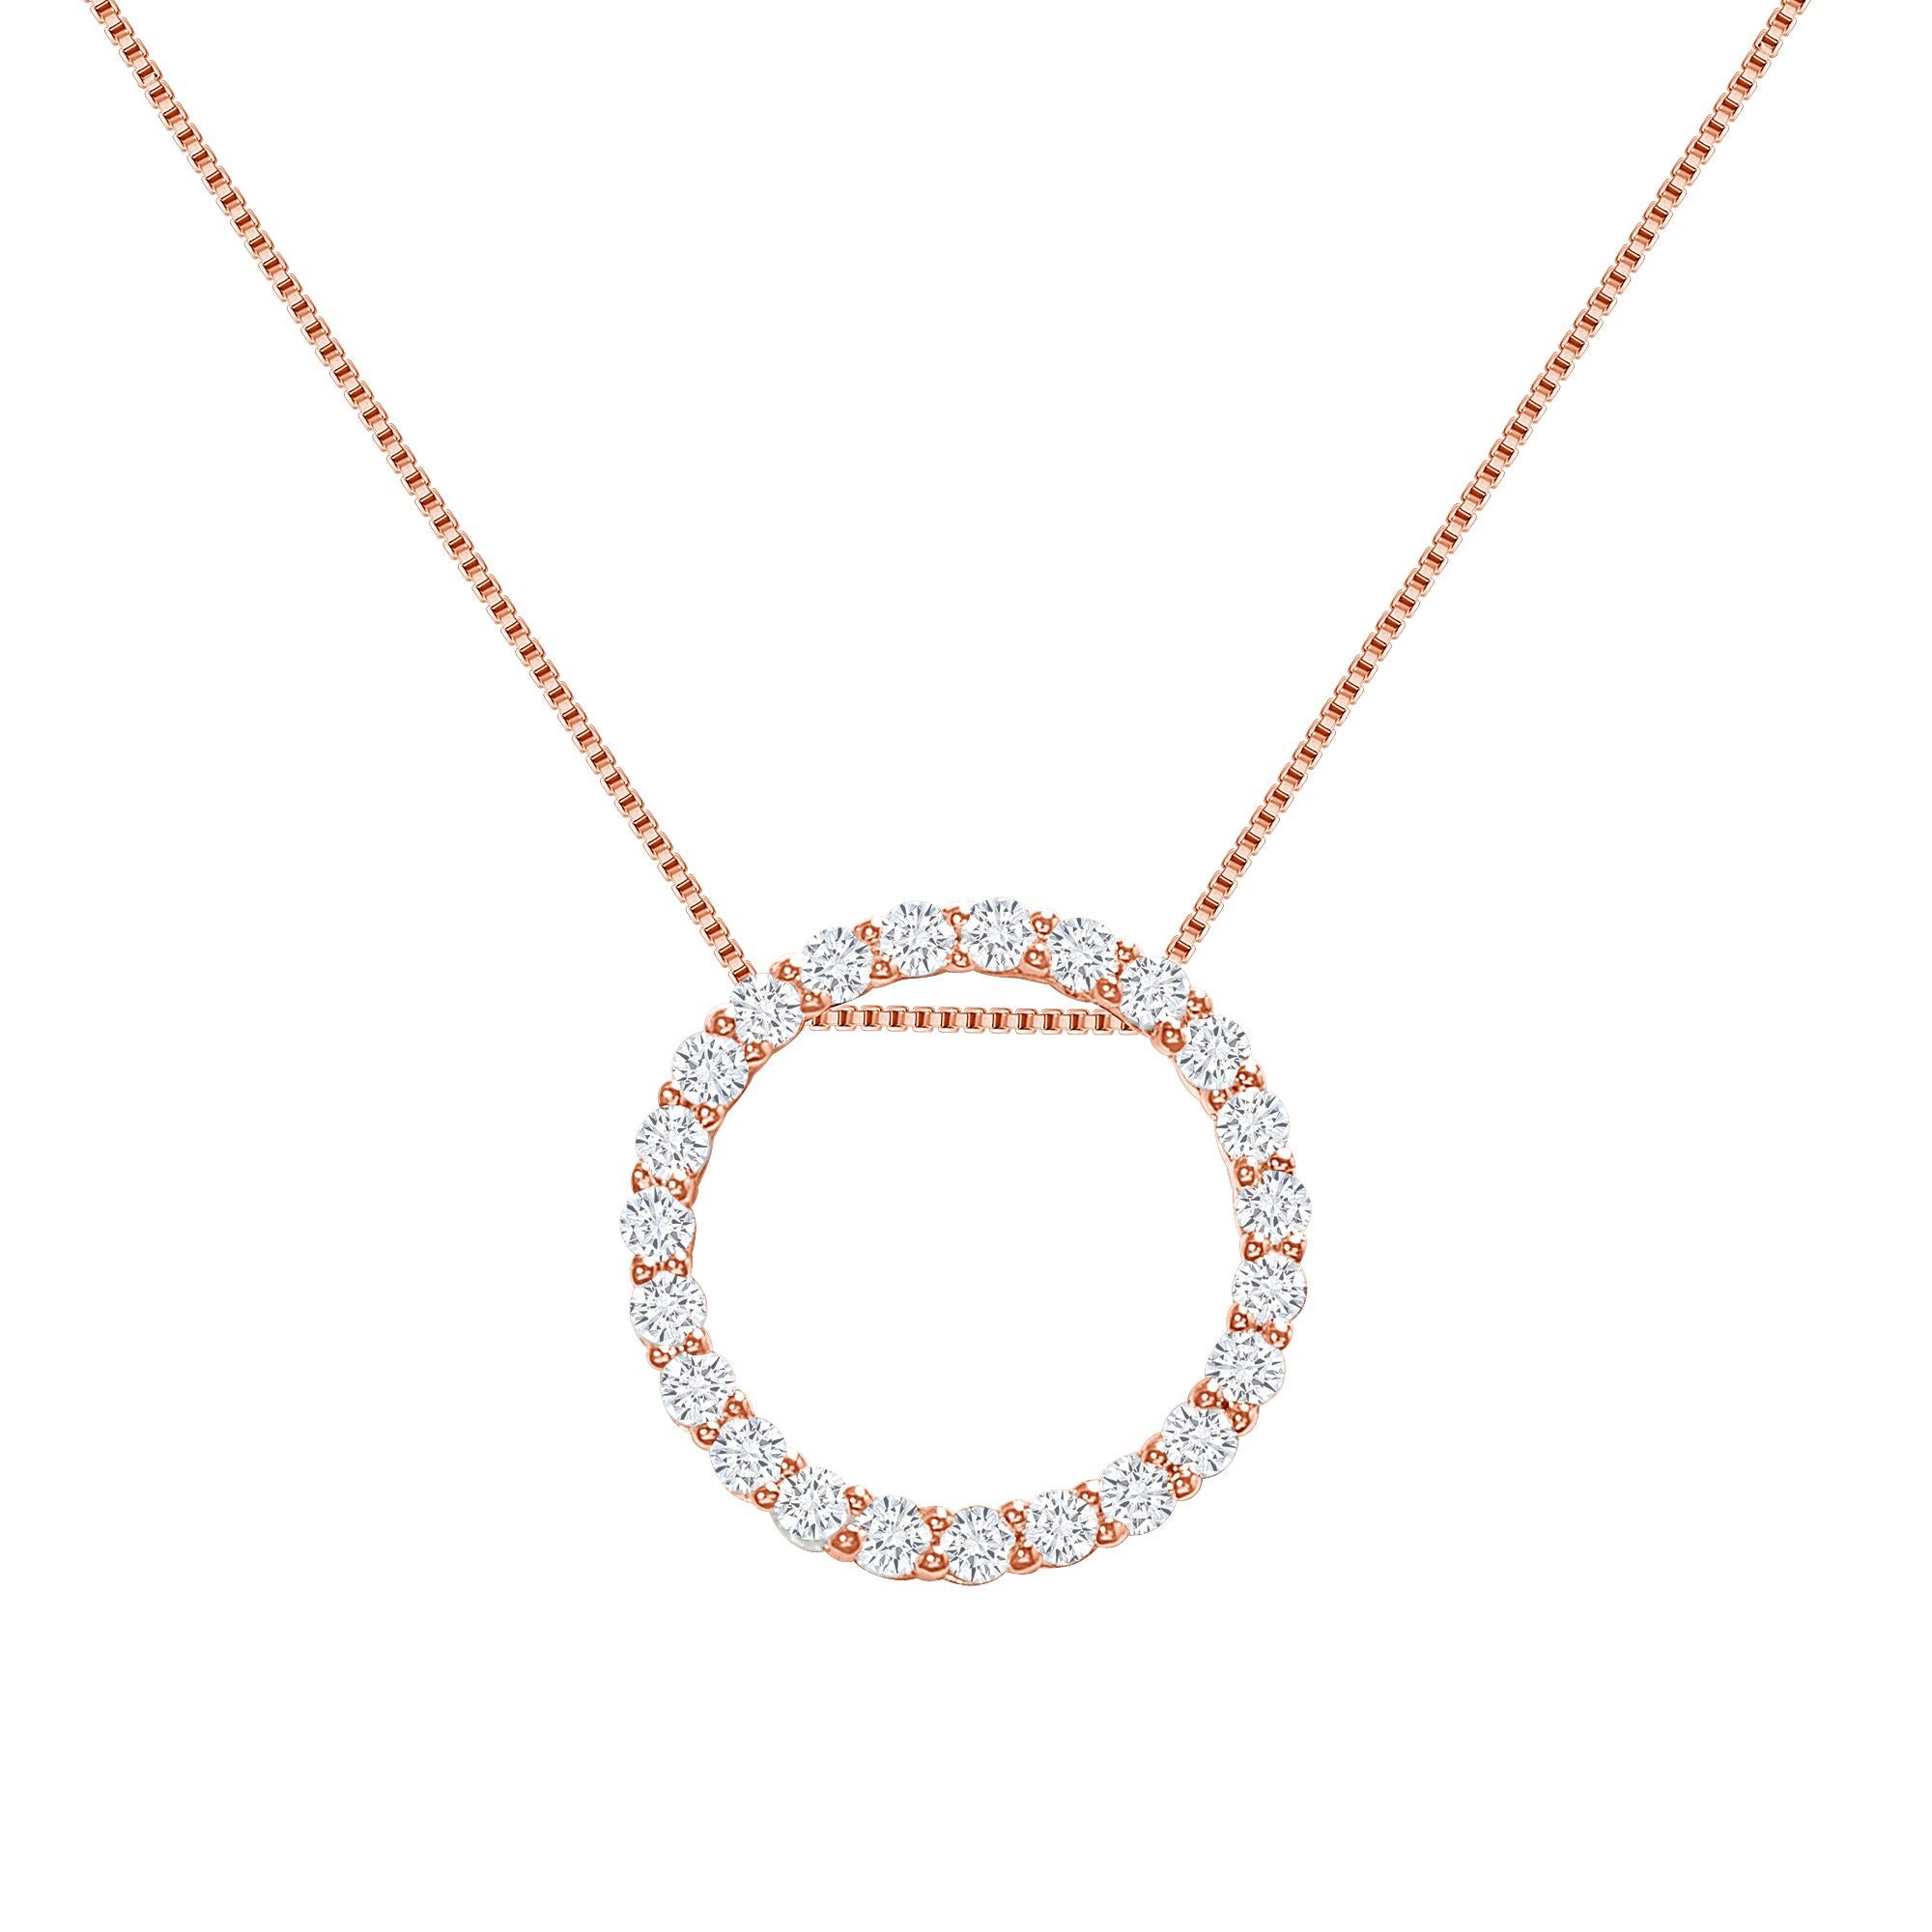 This diamond circle pendant provides a glowing chic look.
Metal: 14k Gold
Diamond Total Carats: 2 carat
Diamond Cut: Round Natural Diamonds (Not Lab Grown)
Diamond Clarity: VS
Diamond Color: F-G
Color: Rose Gold
Necklace Length: 14 inches